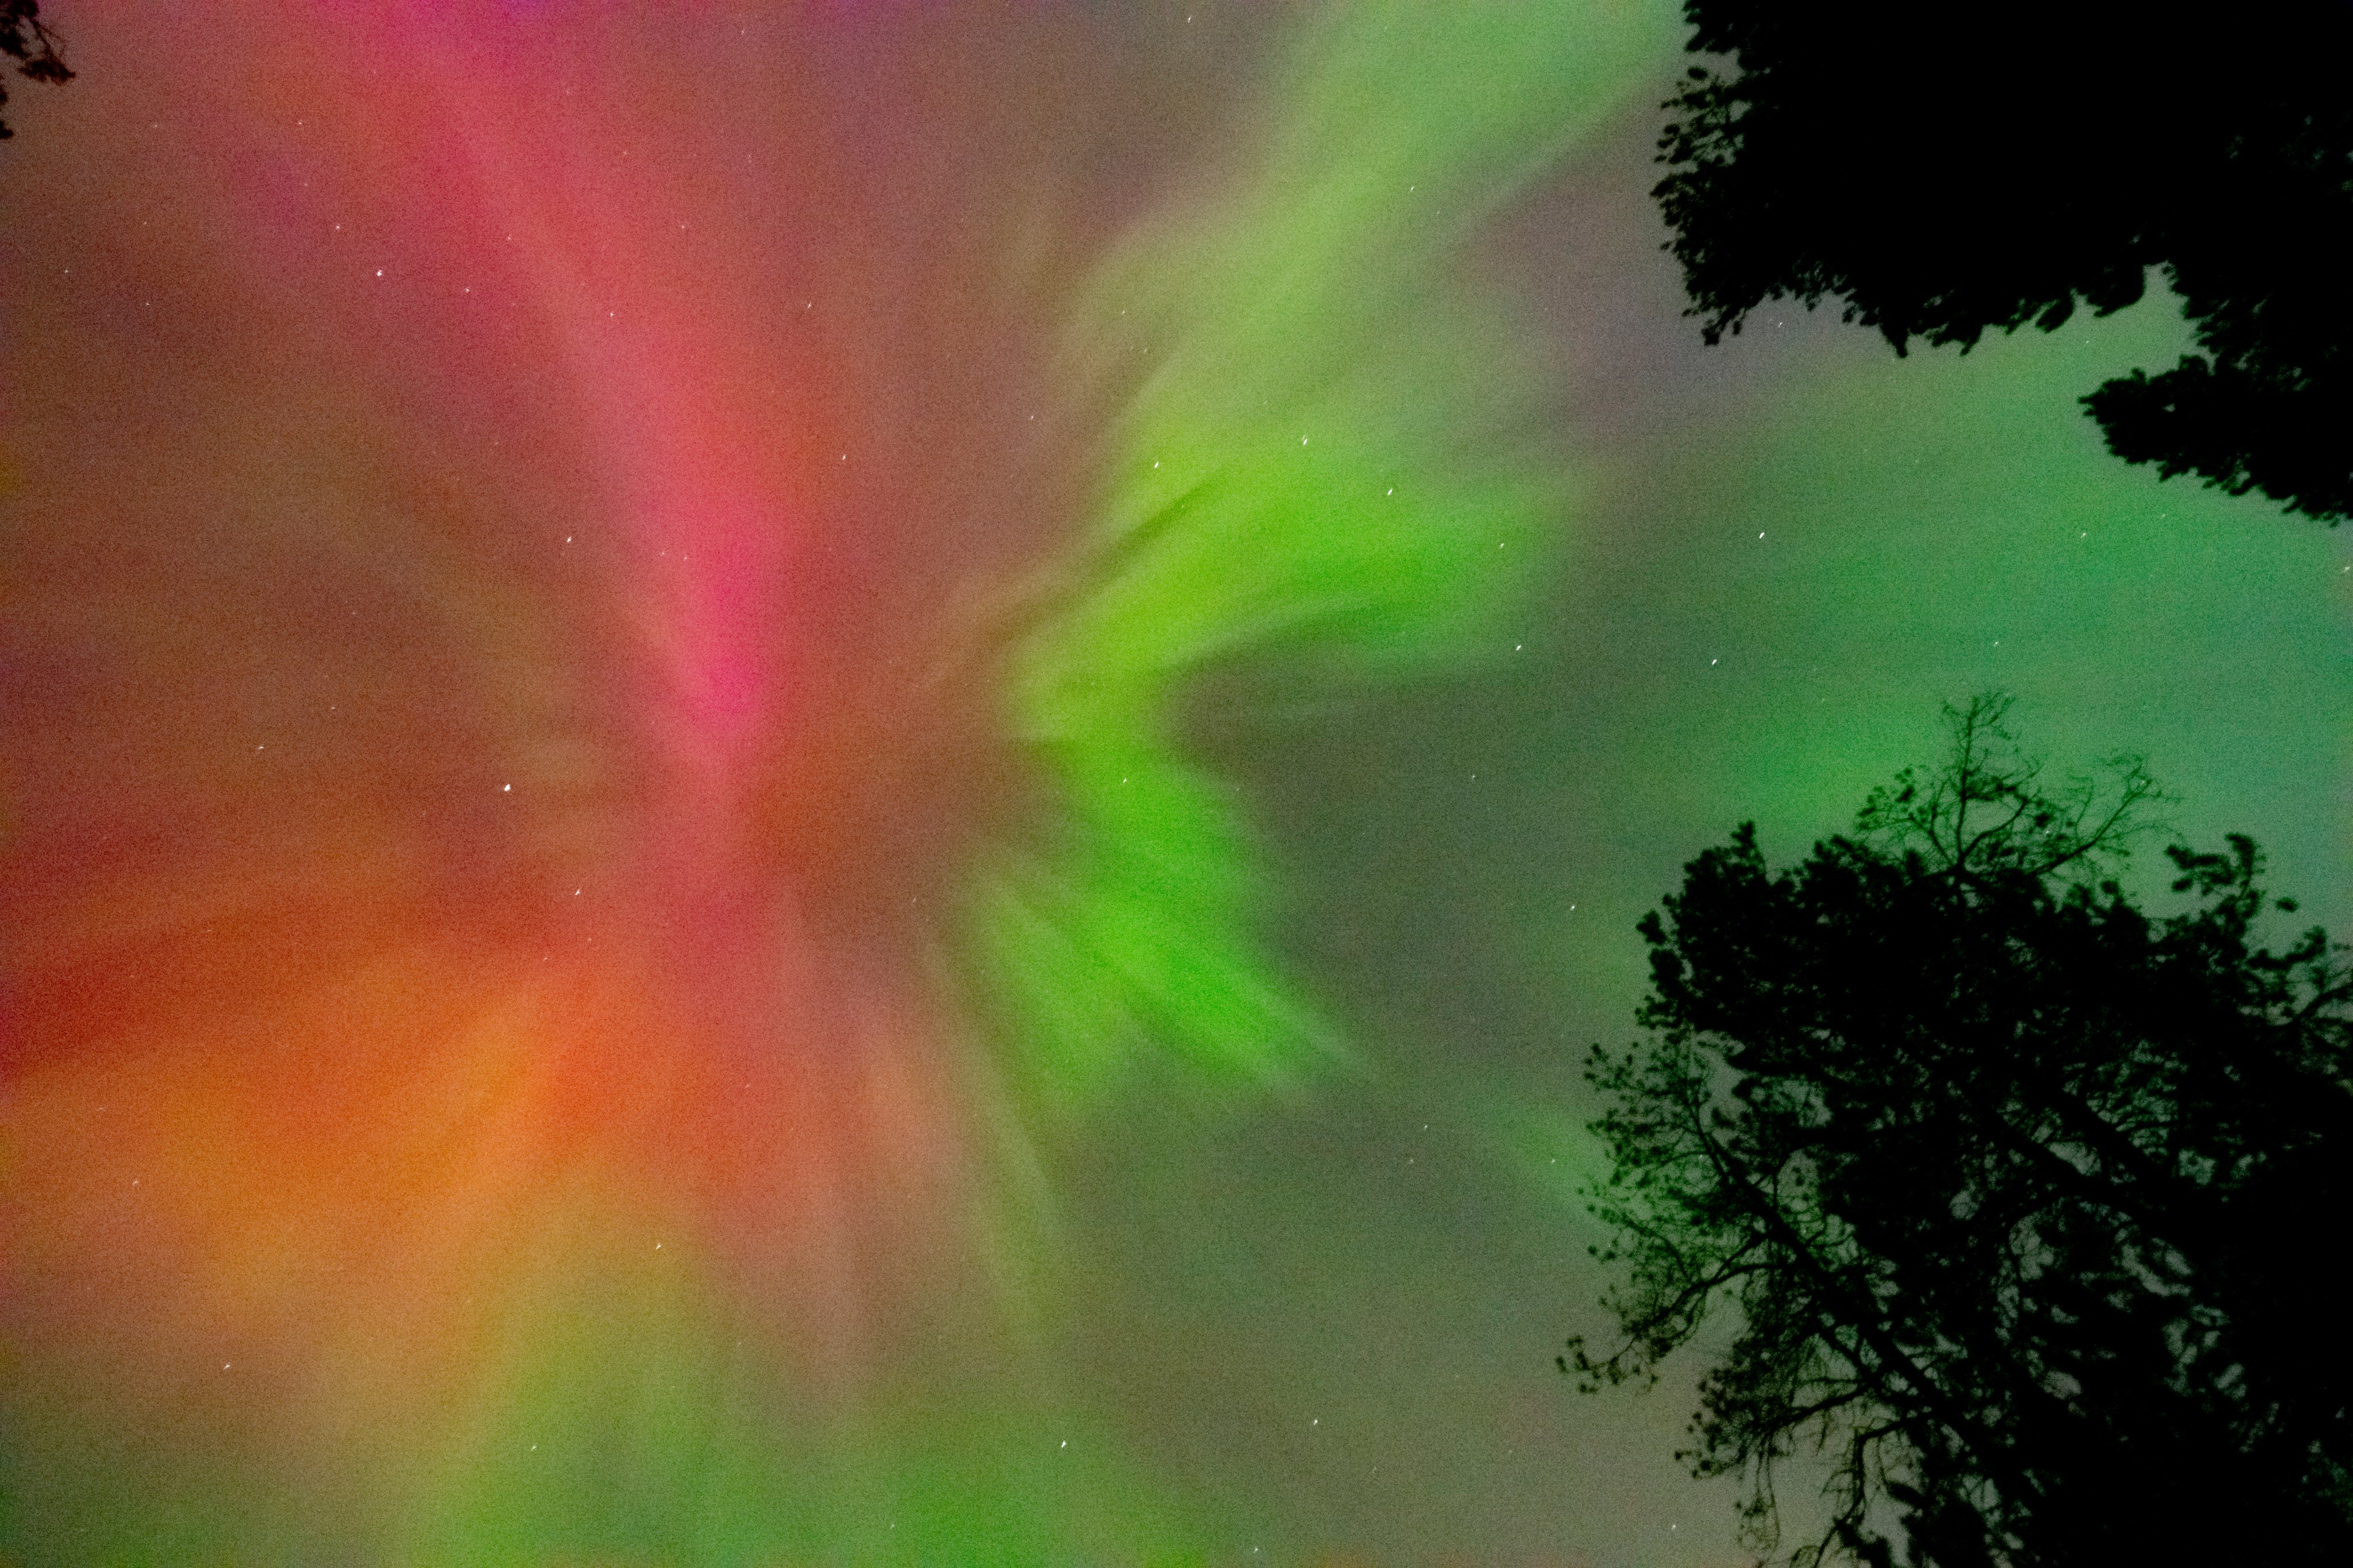 Red and green streaks of an aurora radiate out from the center of the photo. Black silhouettes of trees line the edge.